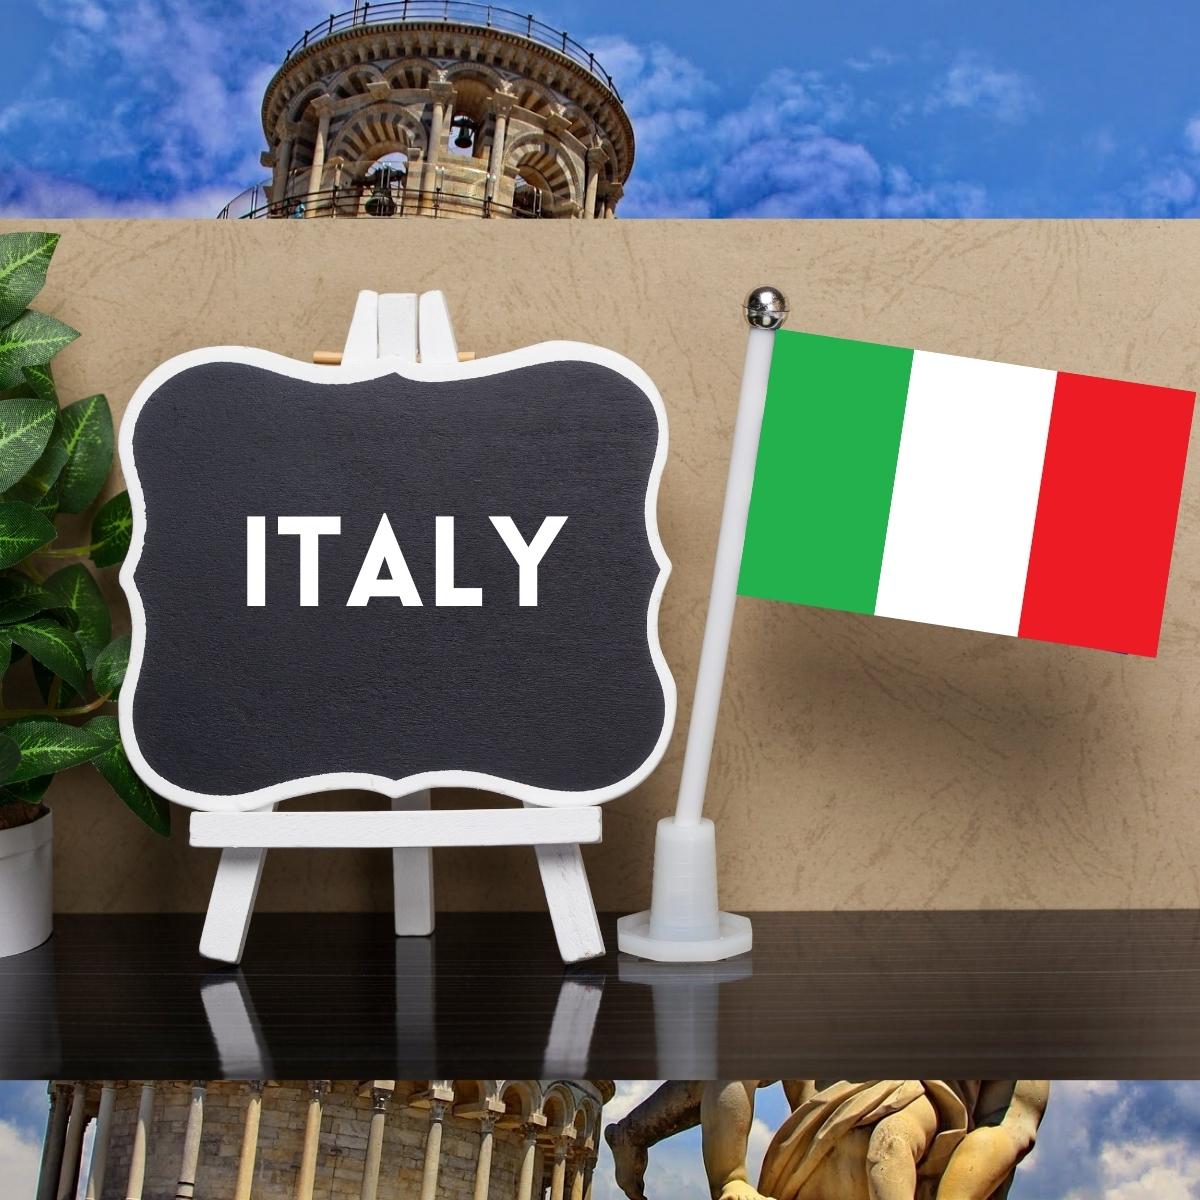 Italy at Euro Fine Foods